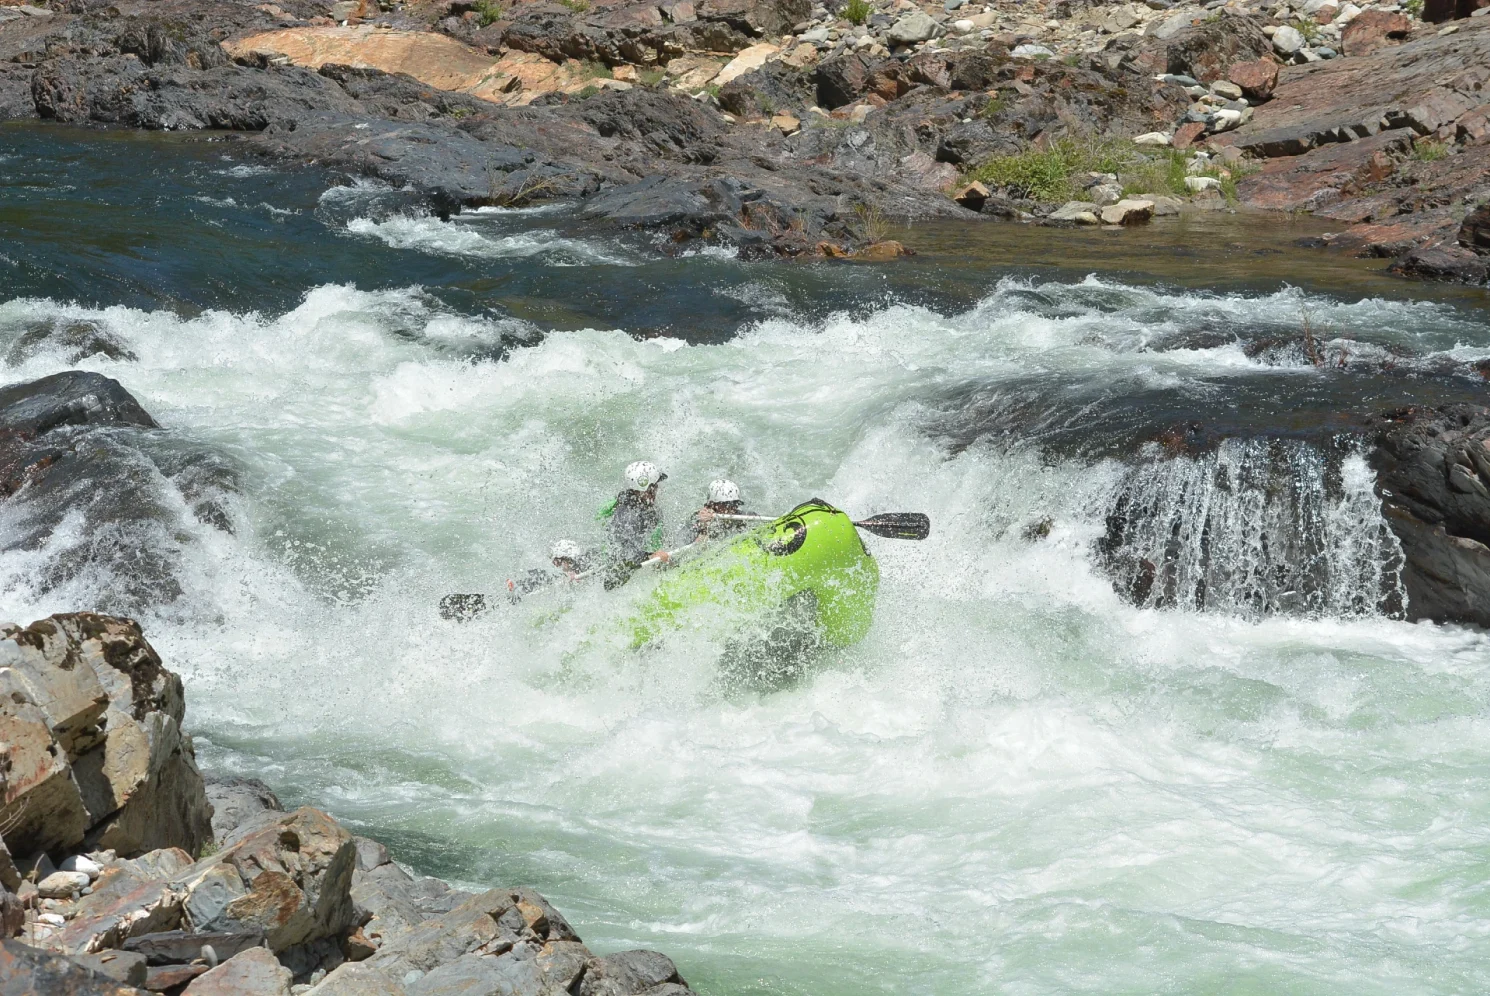 White Water Rafting in the Yuba River